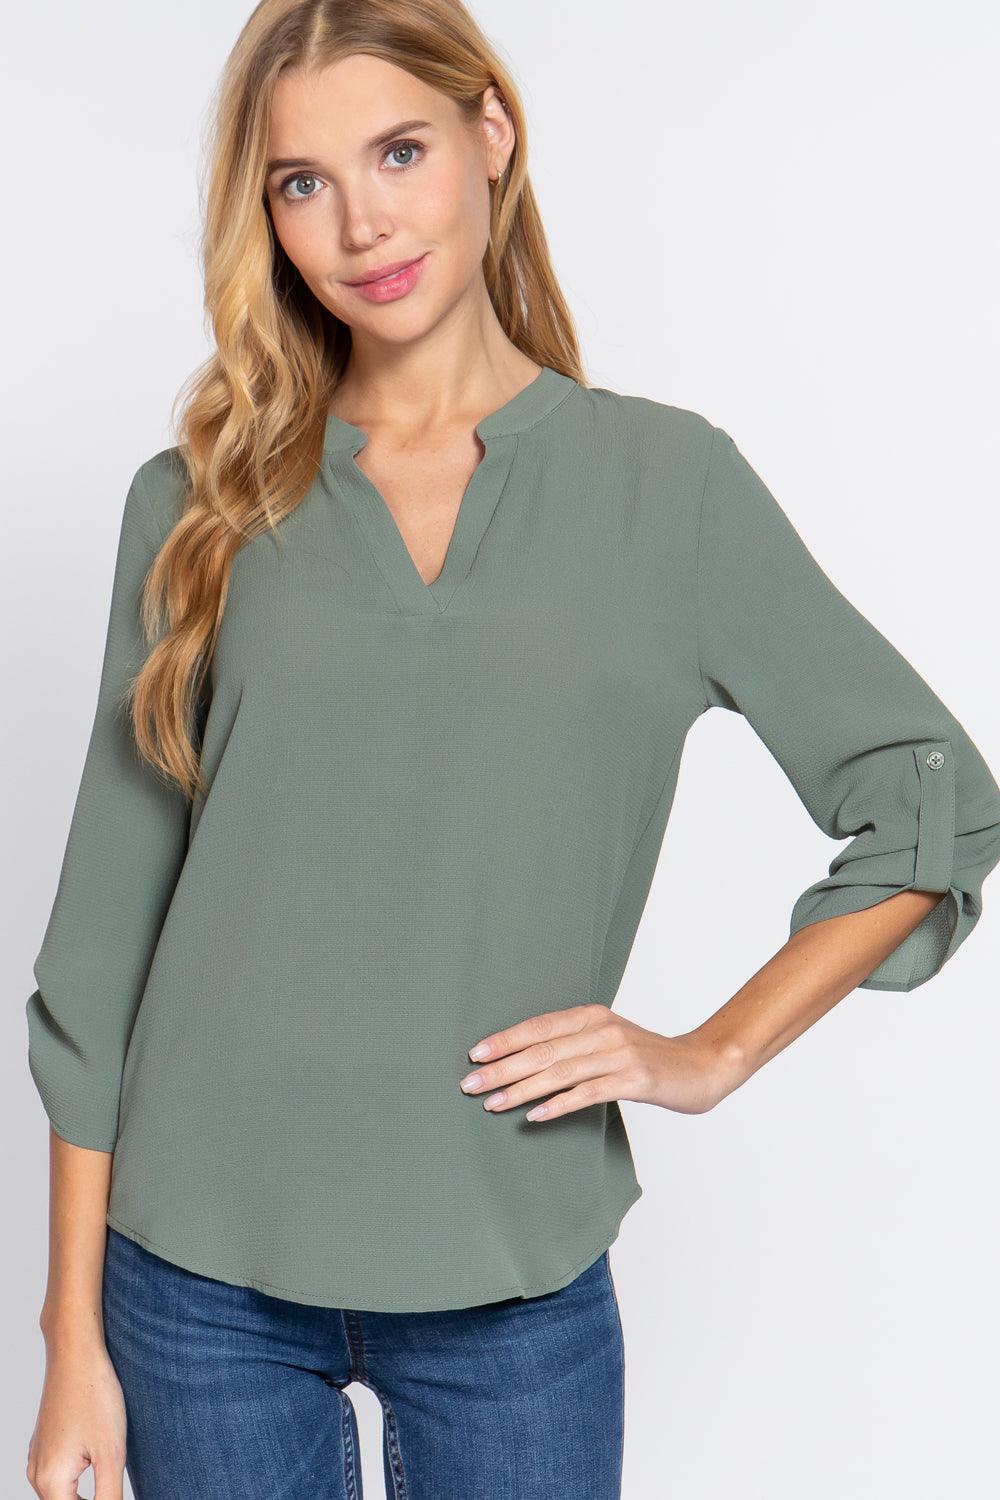 Buying Guide: Stylish and Healthy Dresses 2023 | Fashionably Fit | 3/4 Roll Up Slv Woven Blouse